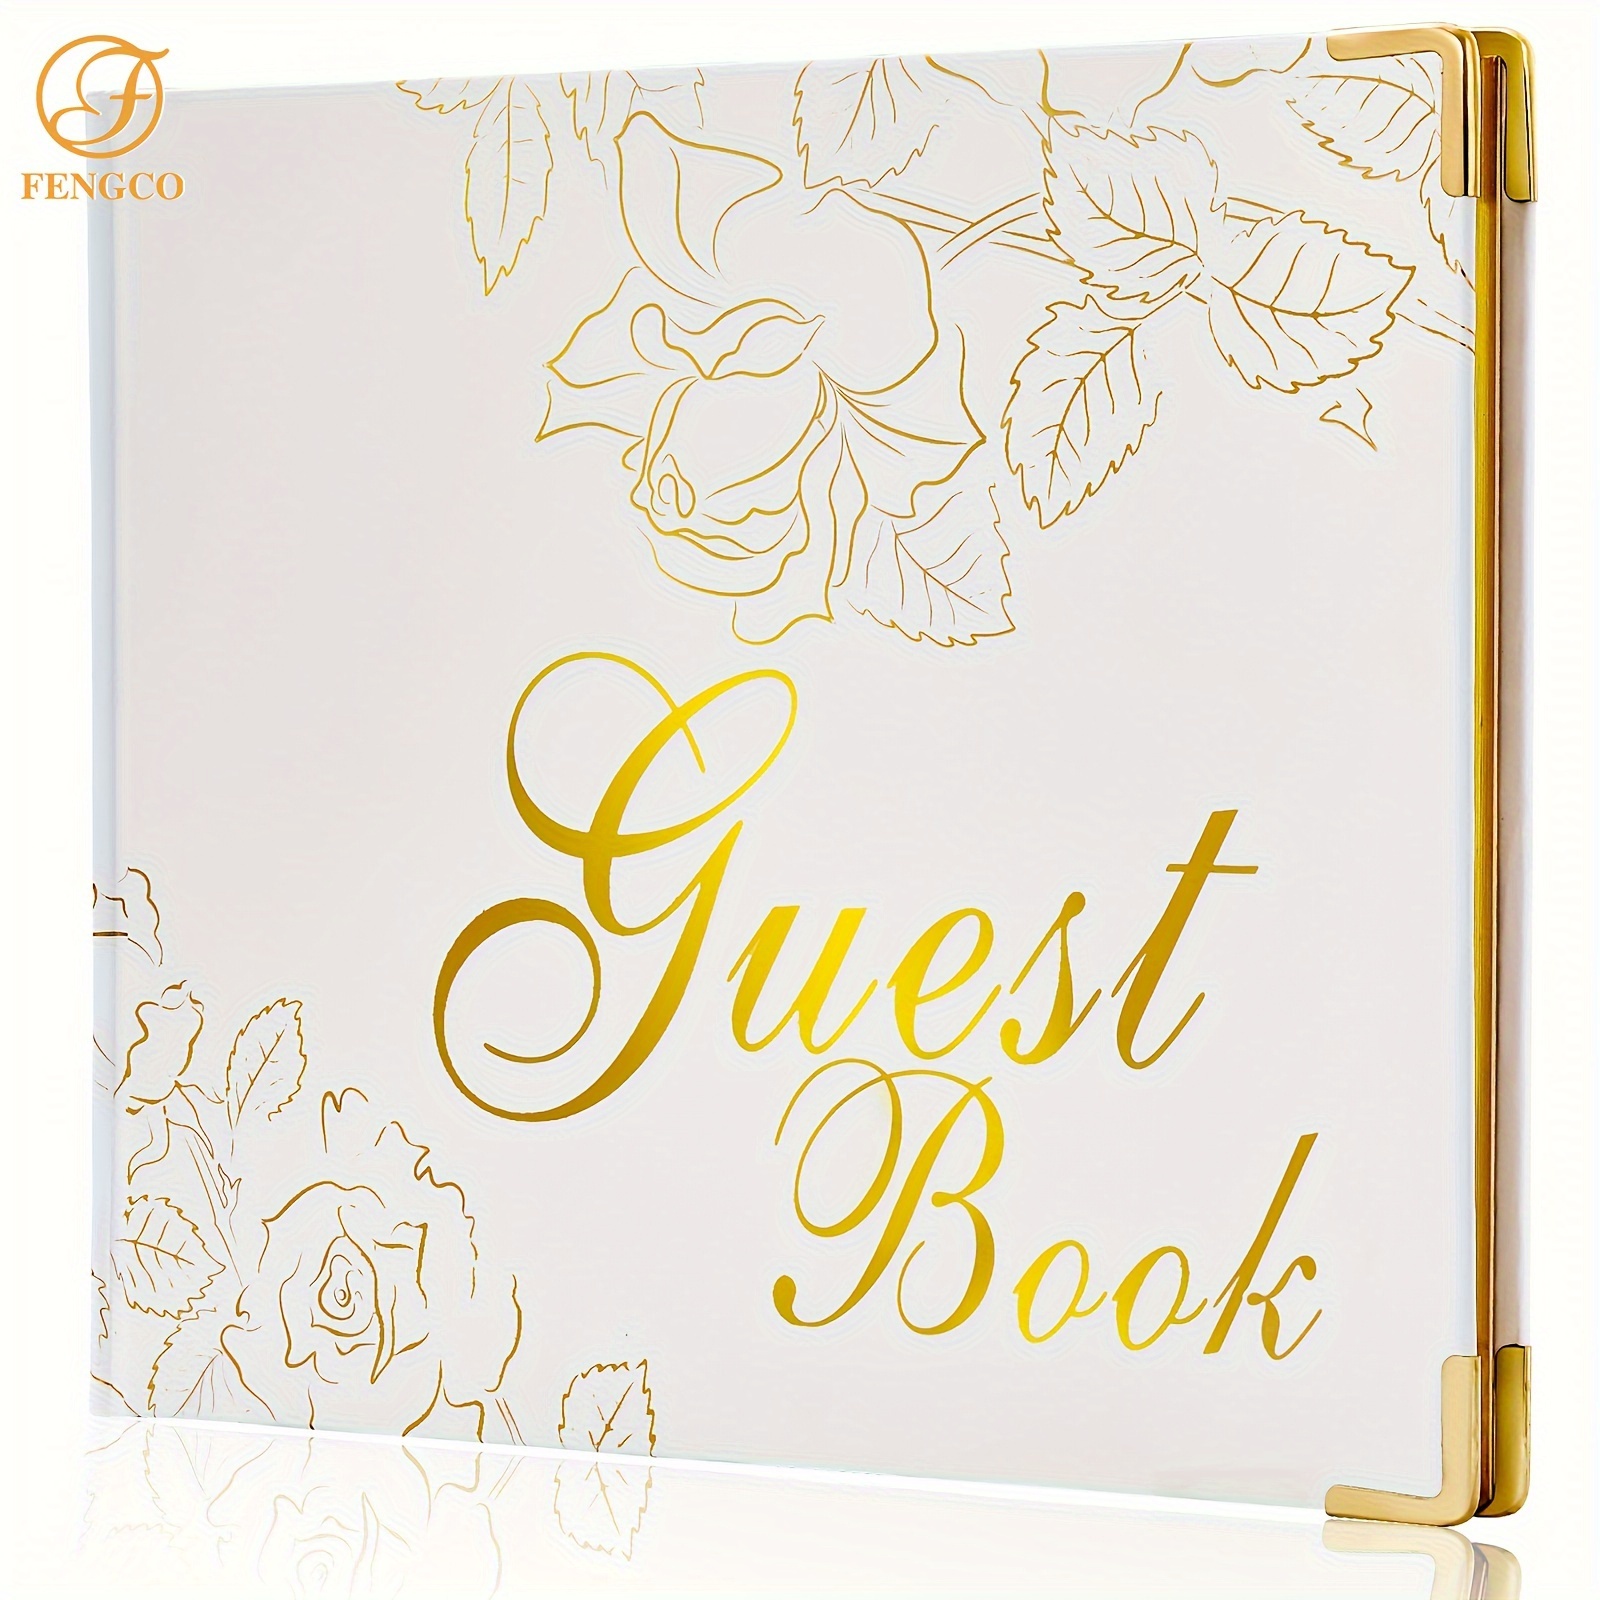 Original Wedding Guest Book with Gold Foil - Gorgeous Weddings Reception Sign in Guestbook 100 Pages for Baby Shower, Wedding, Party, Polaroid